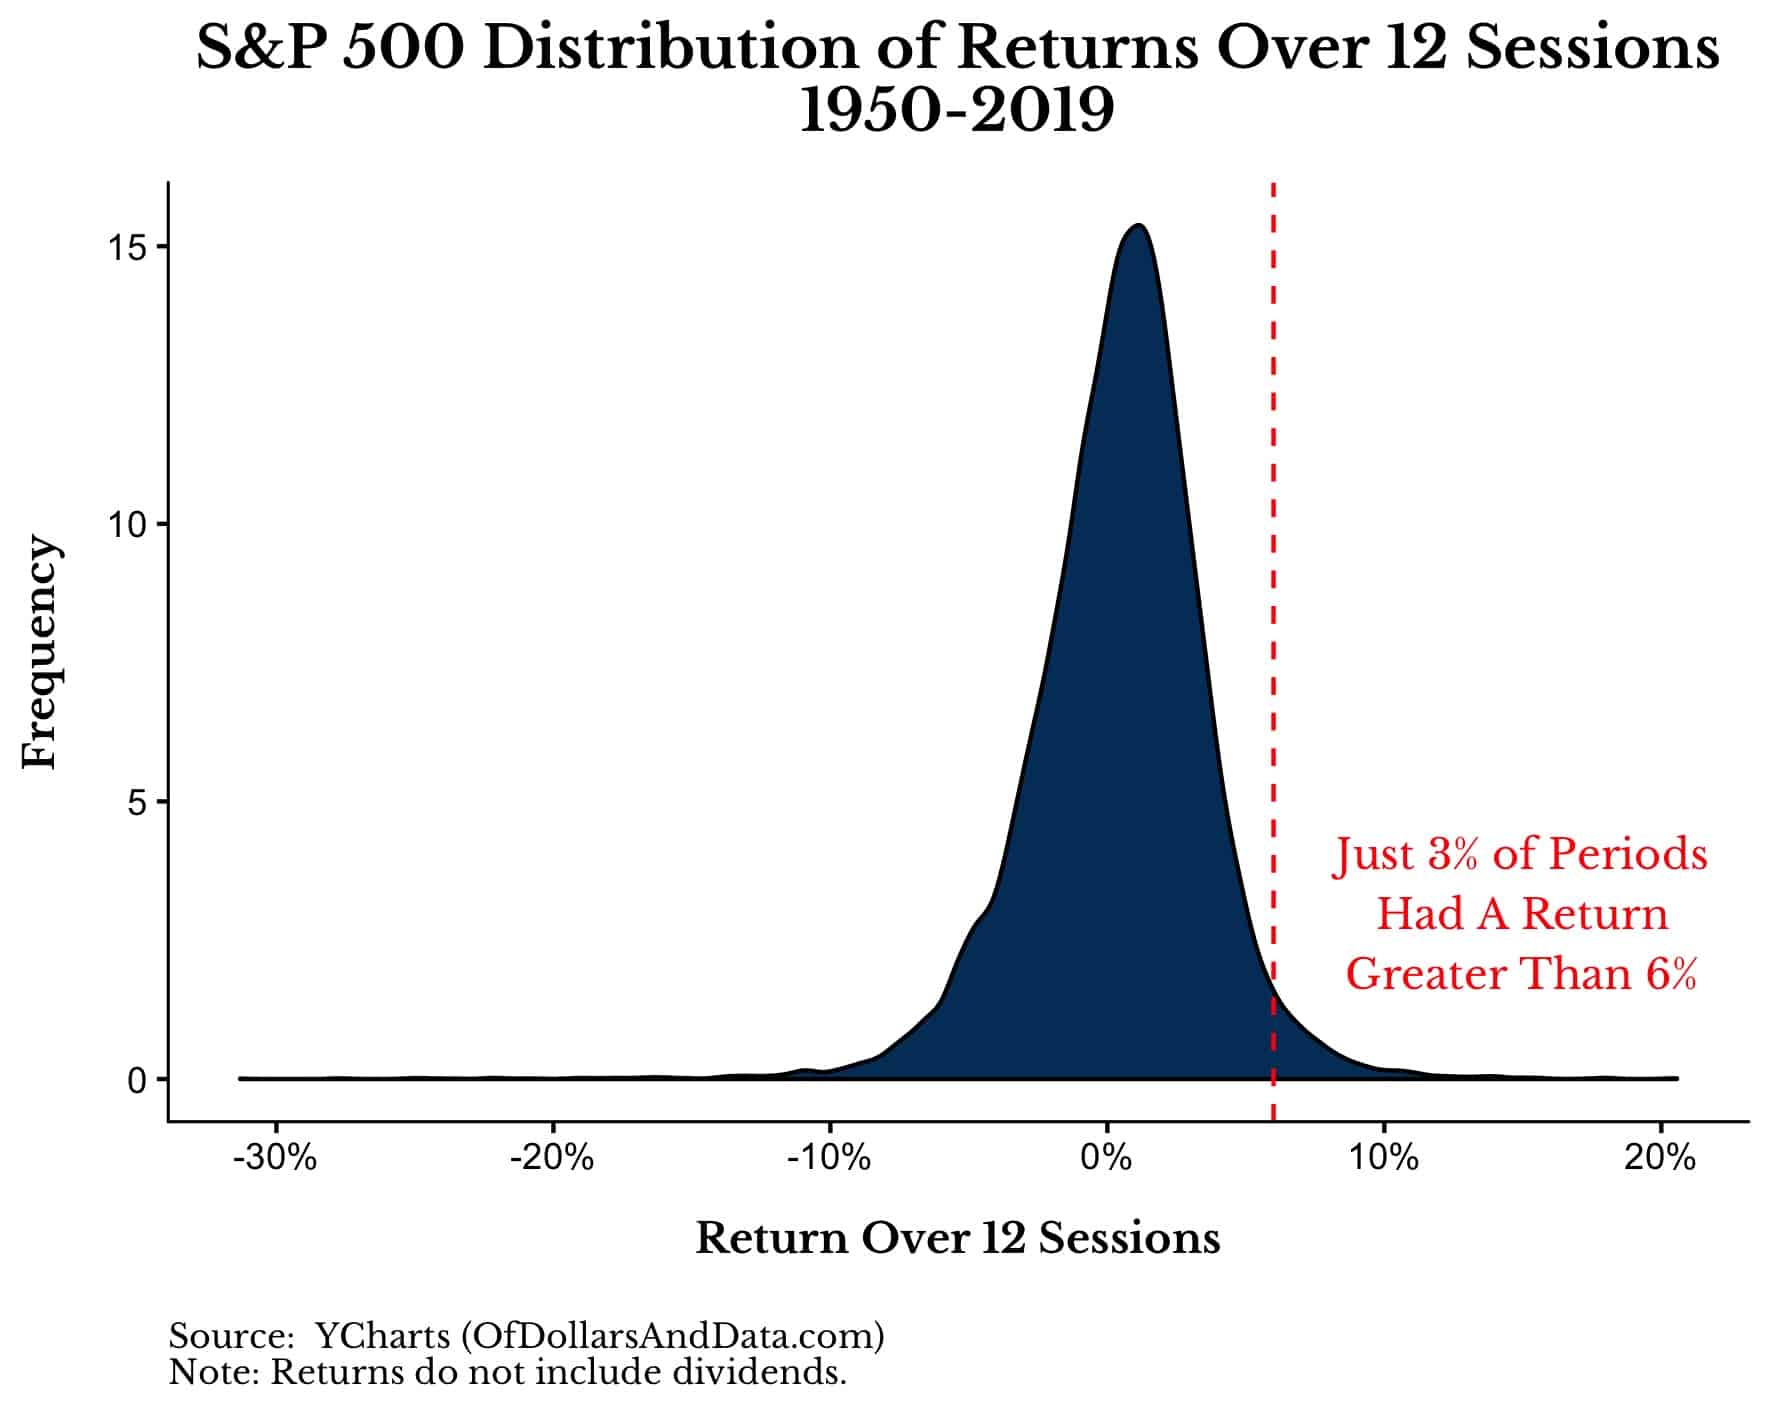 S&P 500 distribution of returns over 12 sessions with the return I experienced highlighted.